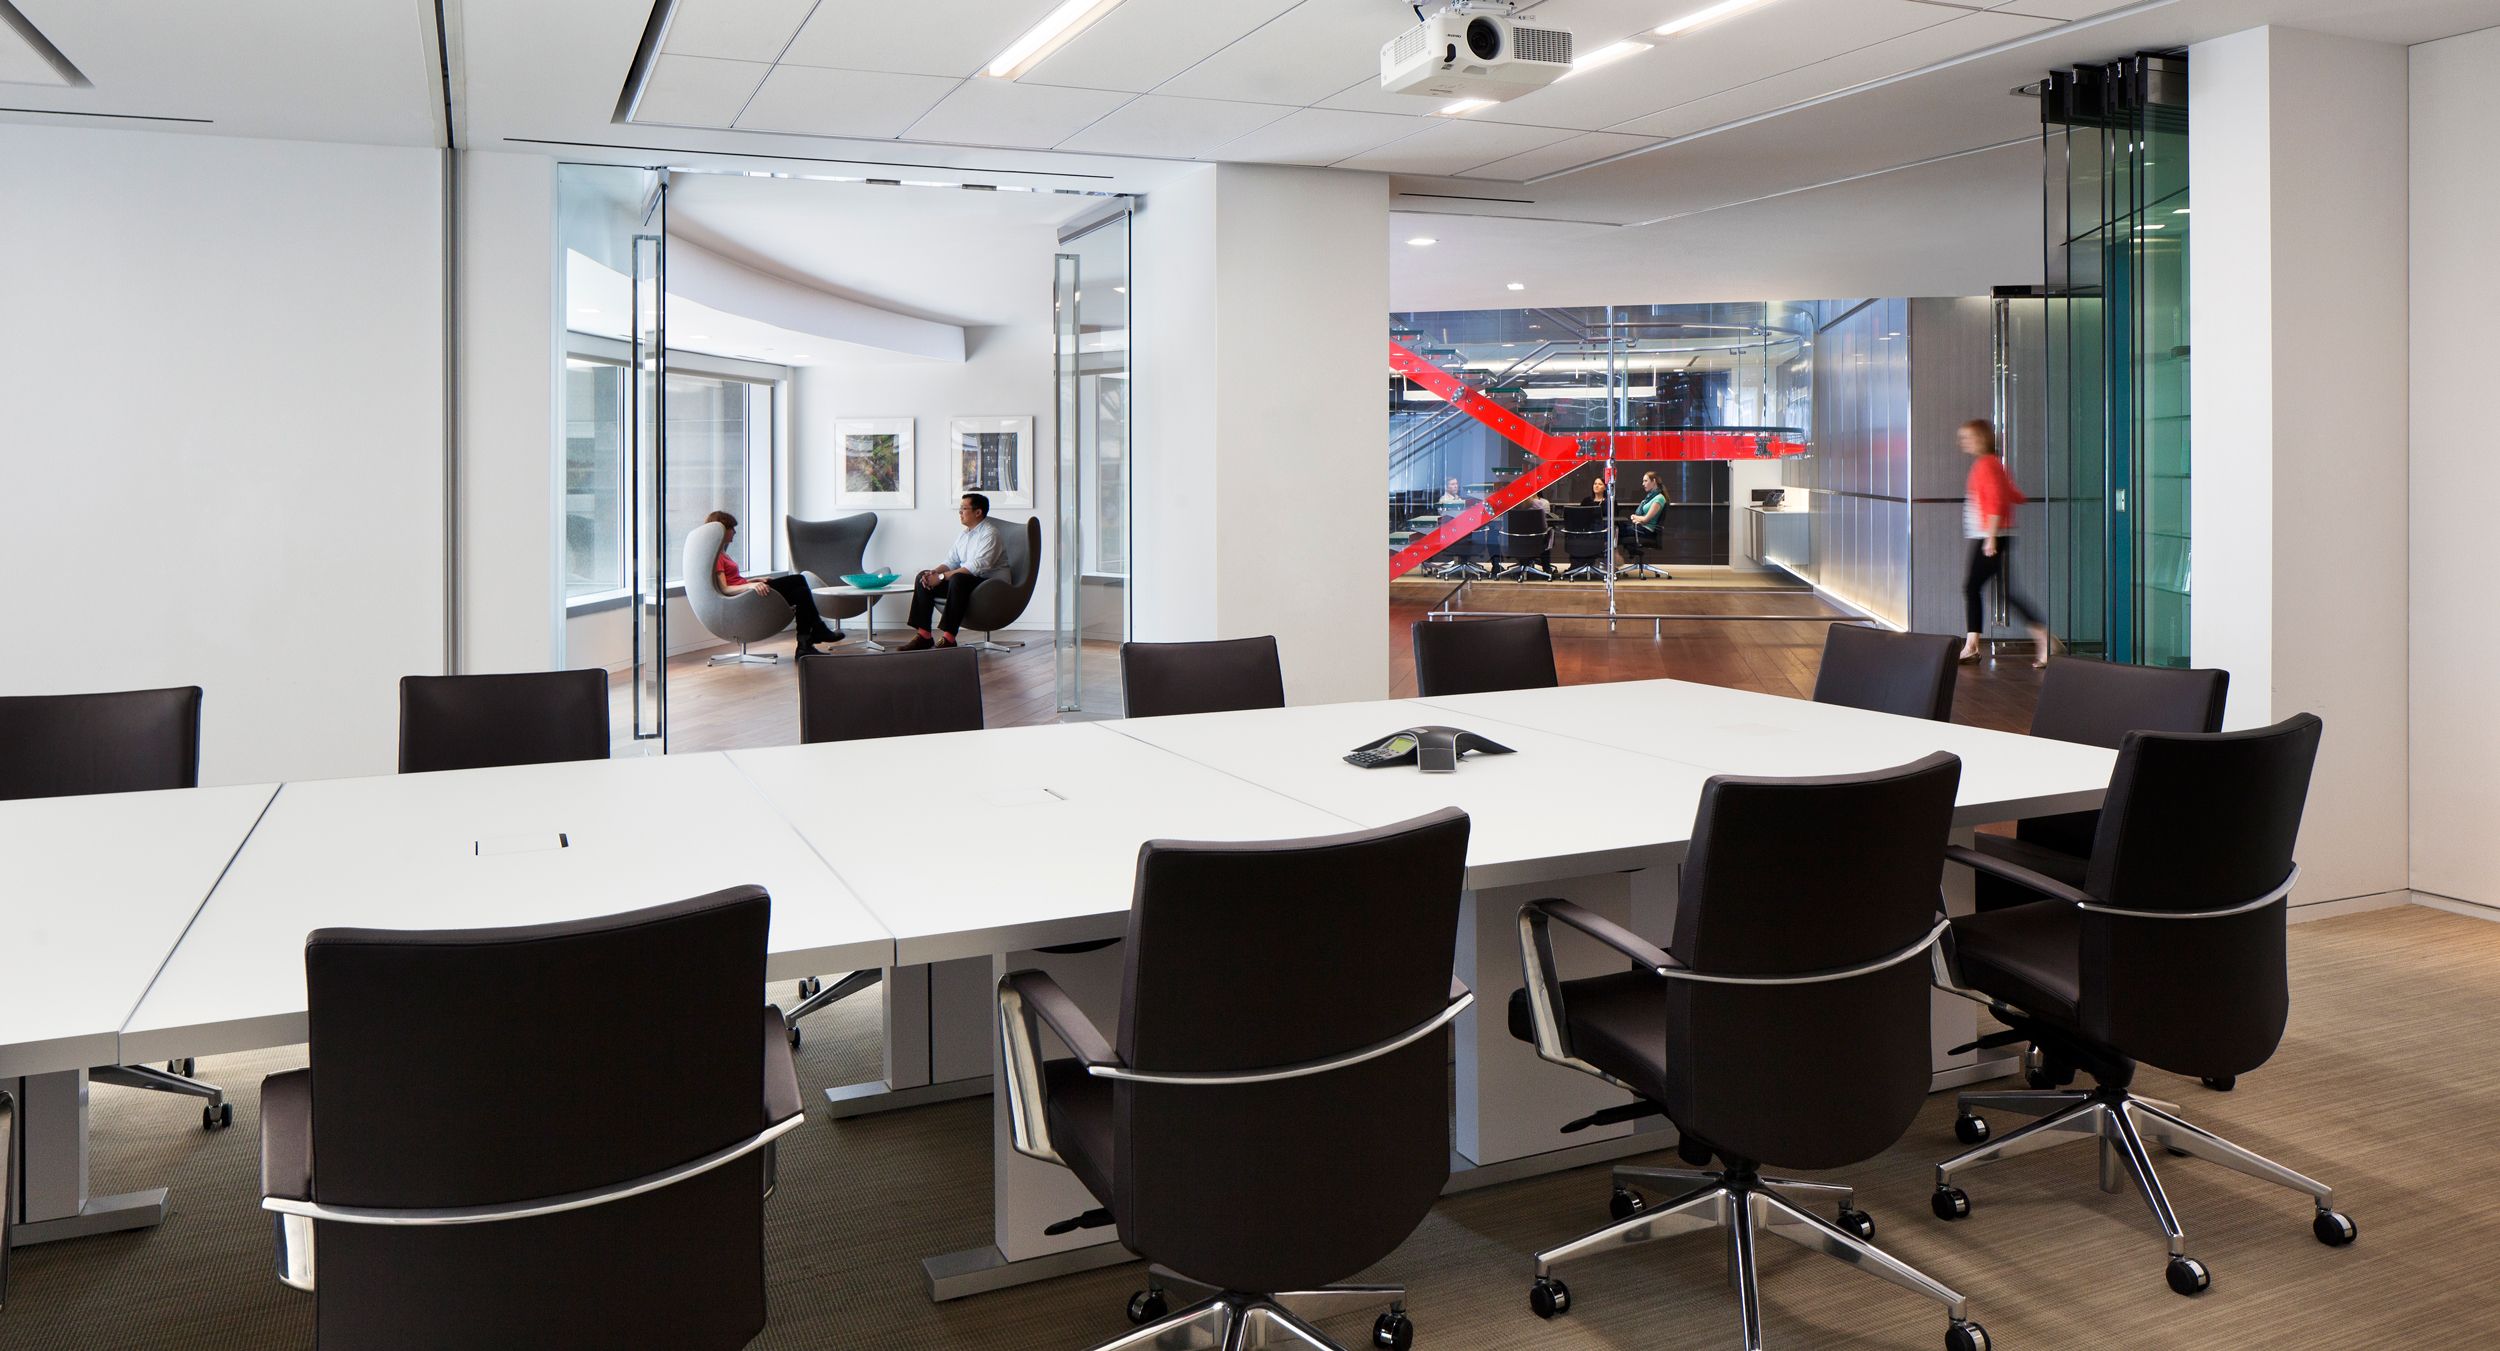 MOTUS tables in etched white glass create conference space that is beautiful and flexible.